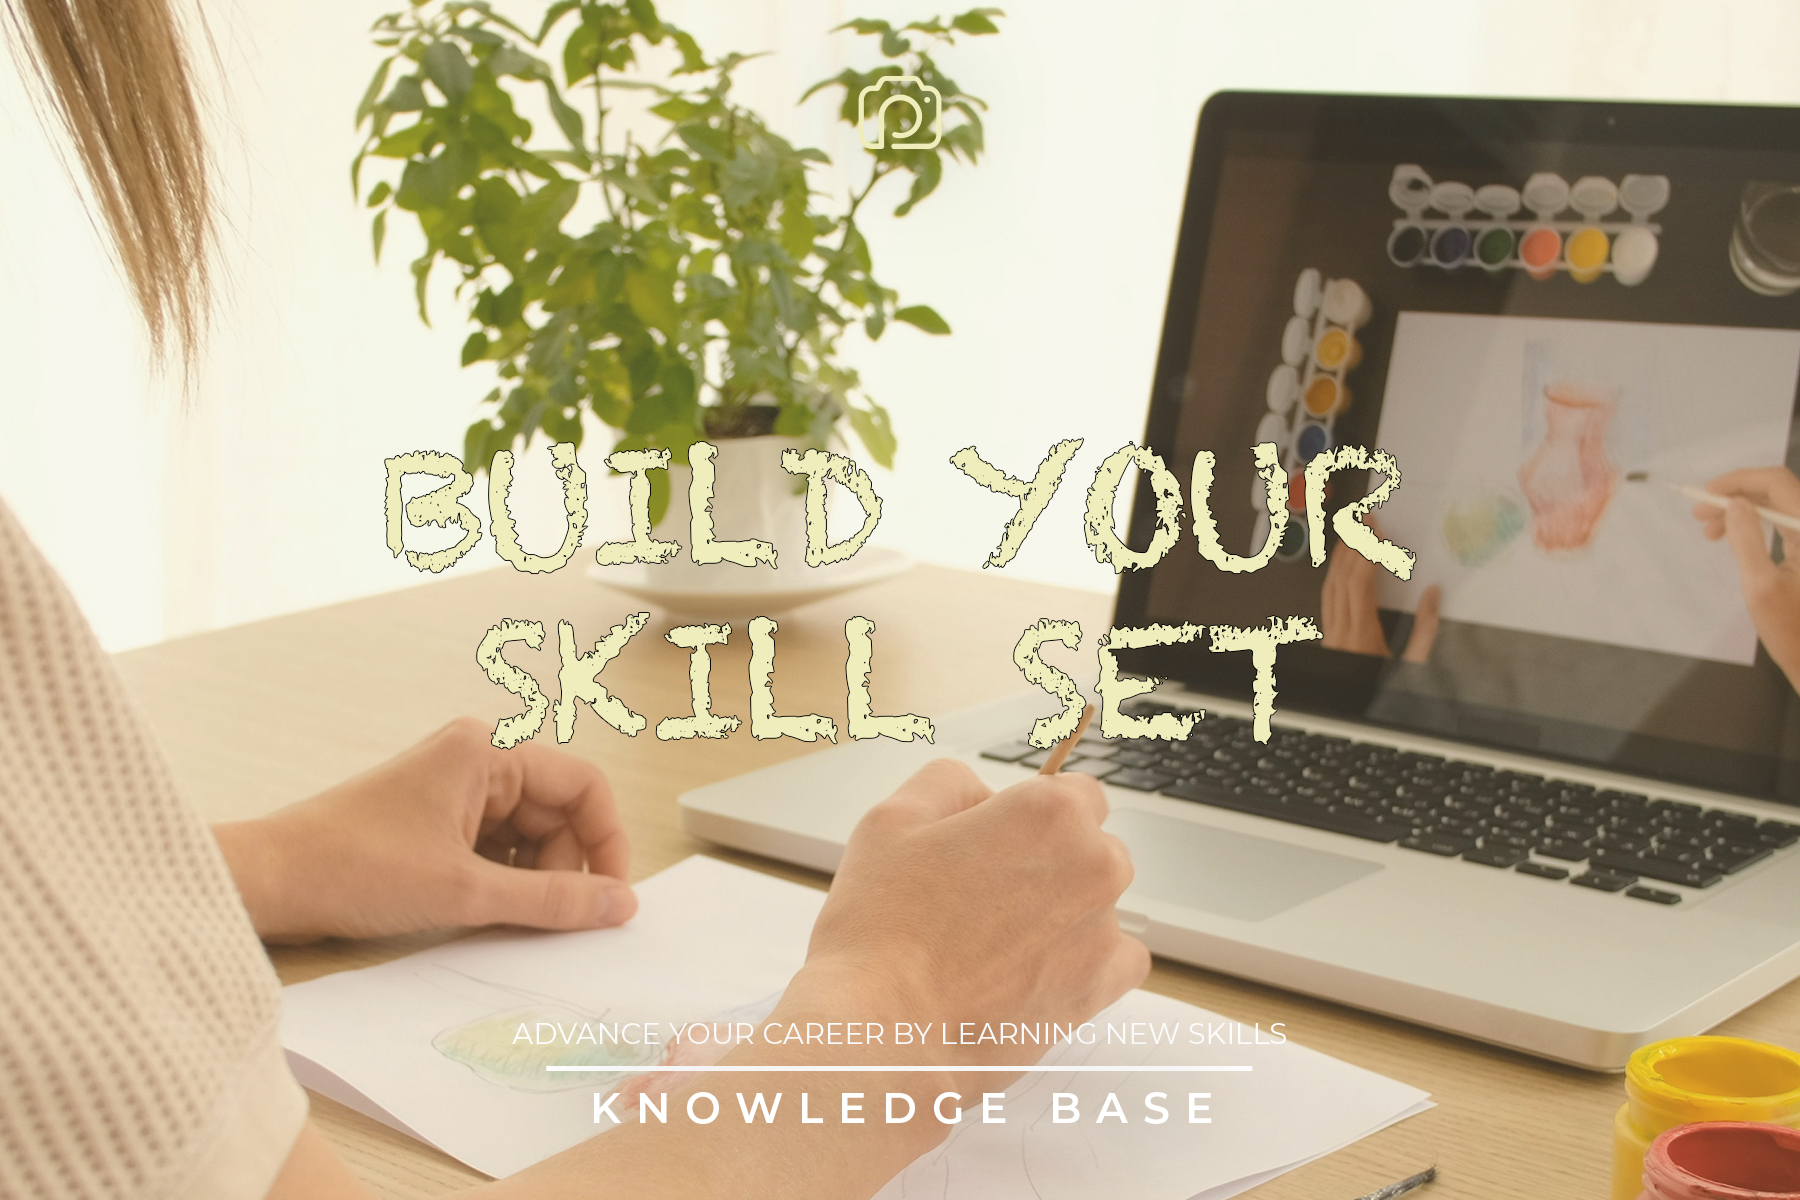 How to build your skill set for the future